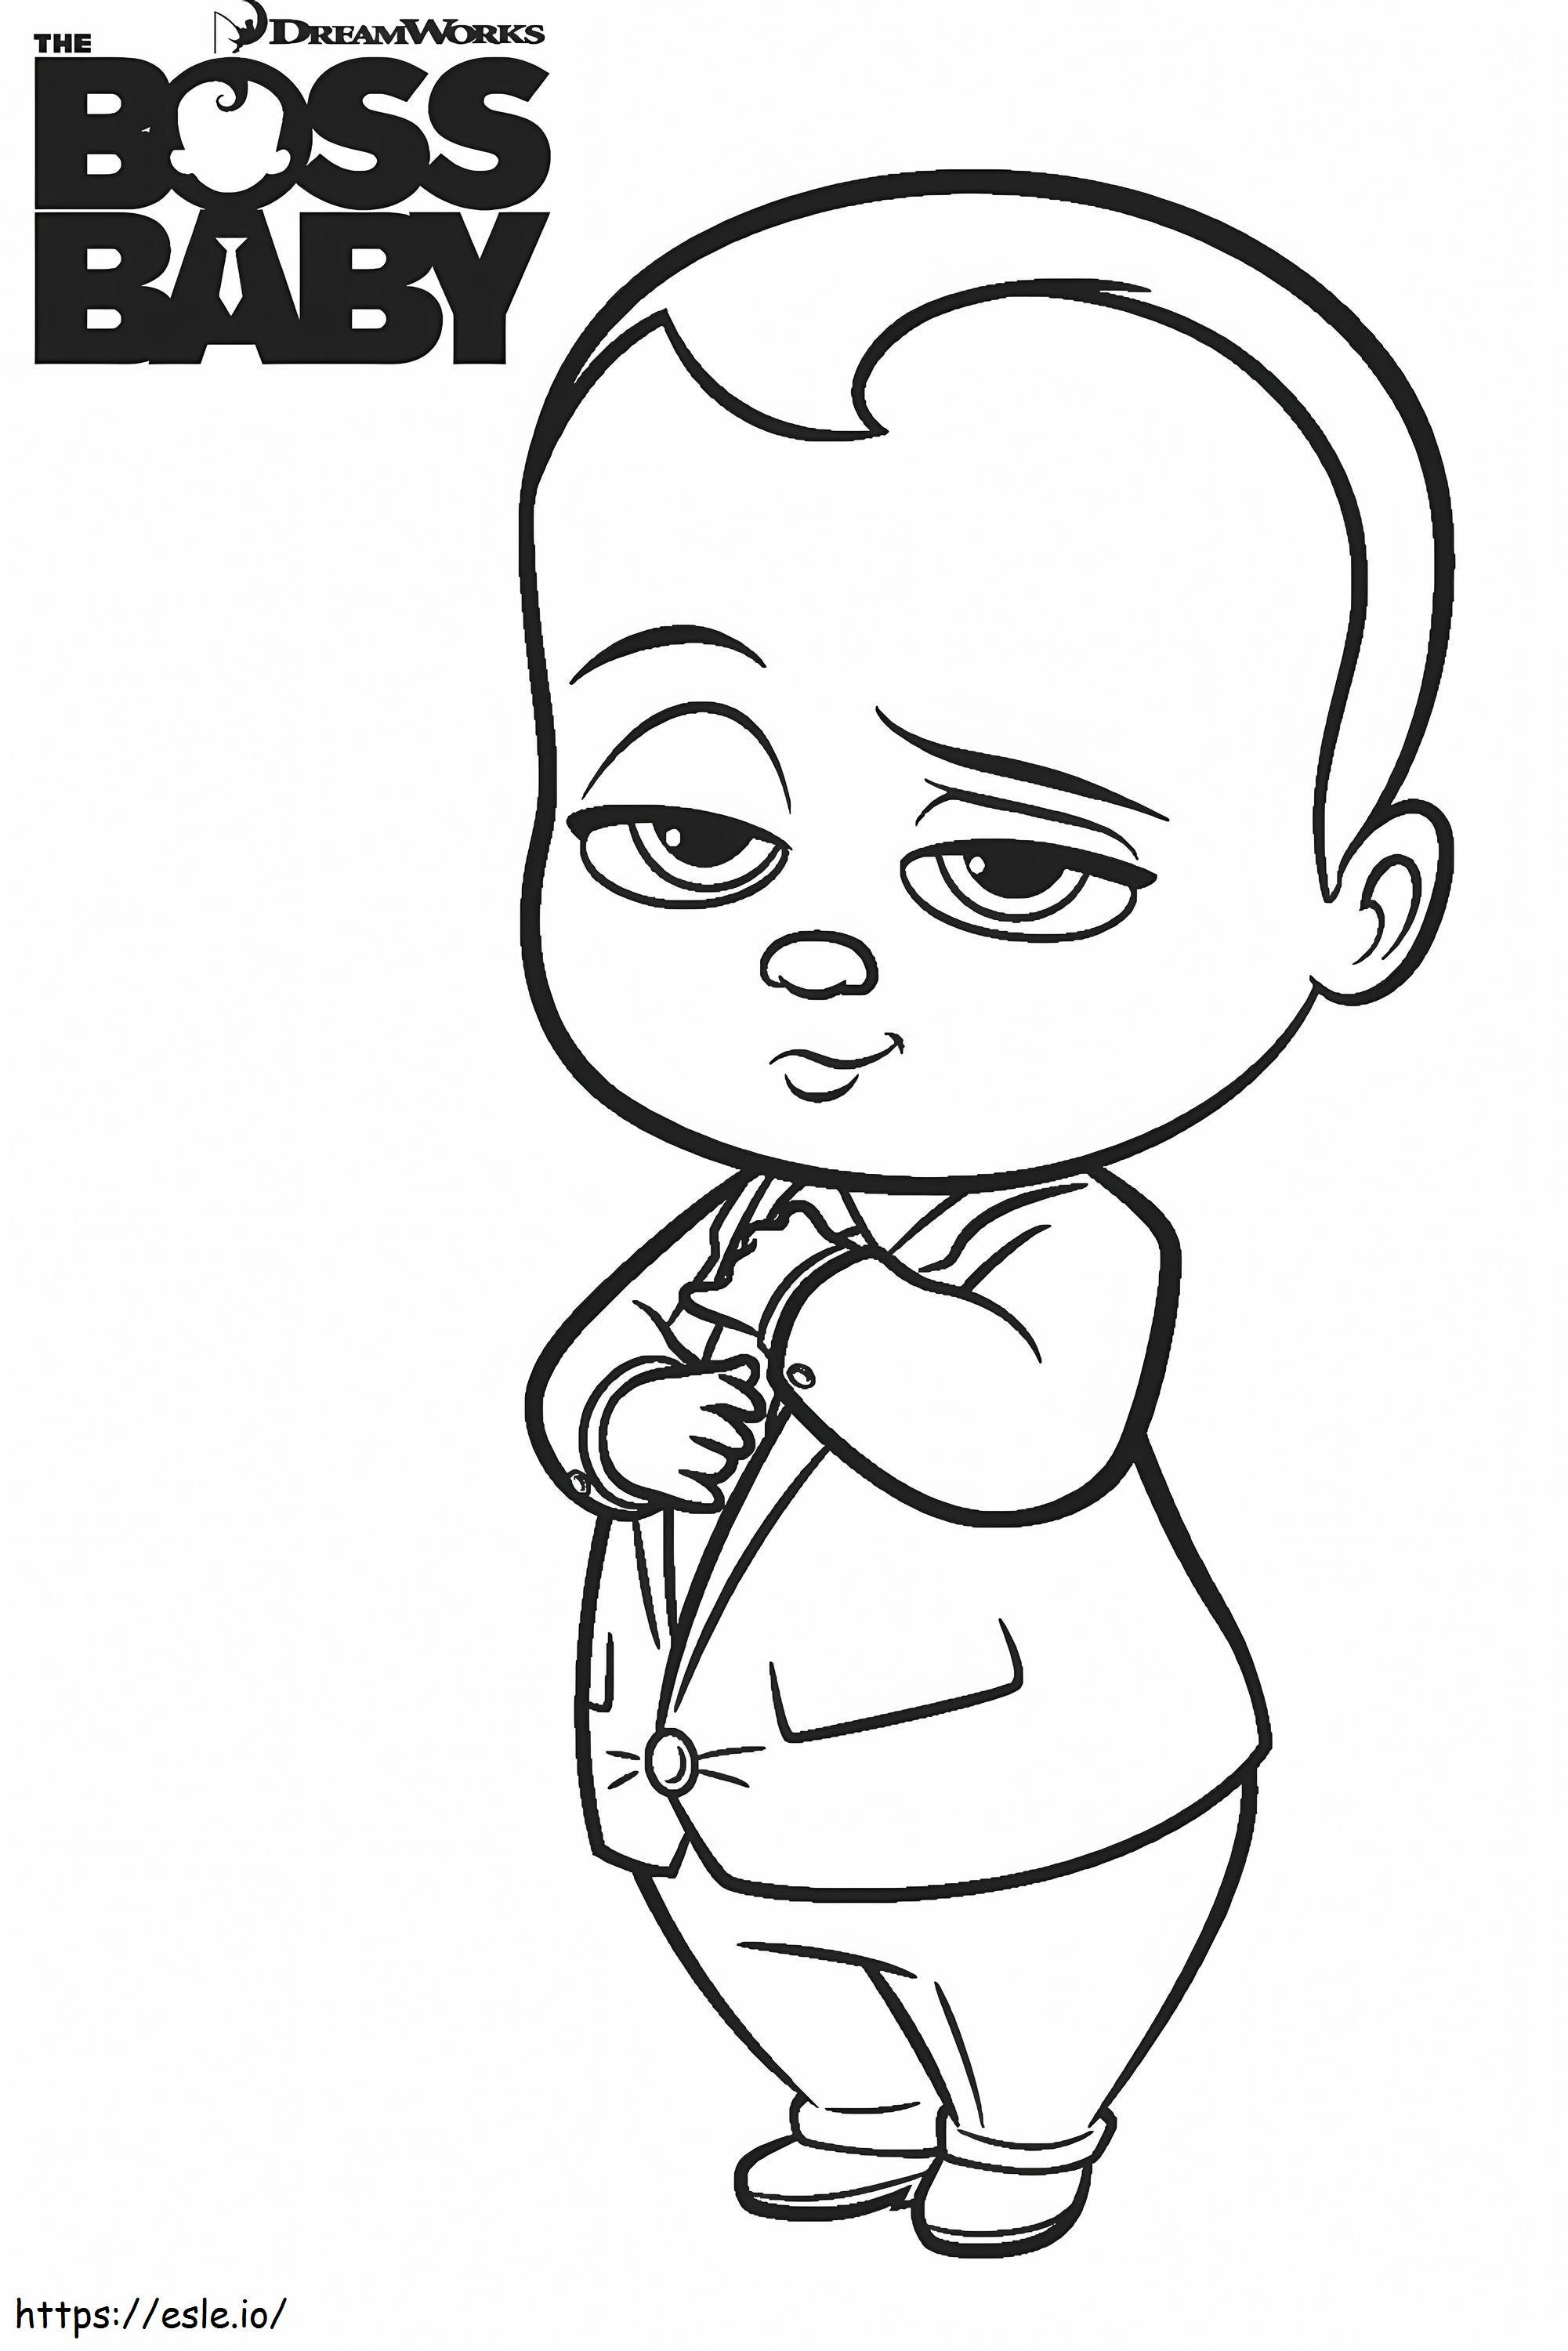 1530932901 Boss Baby A4 coloring page